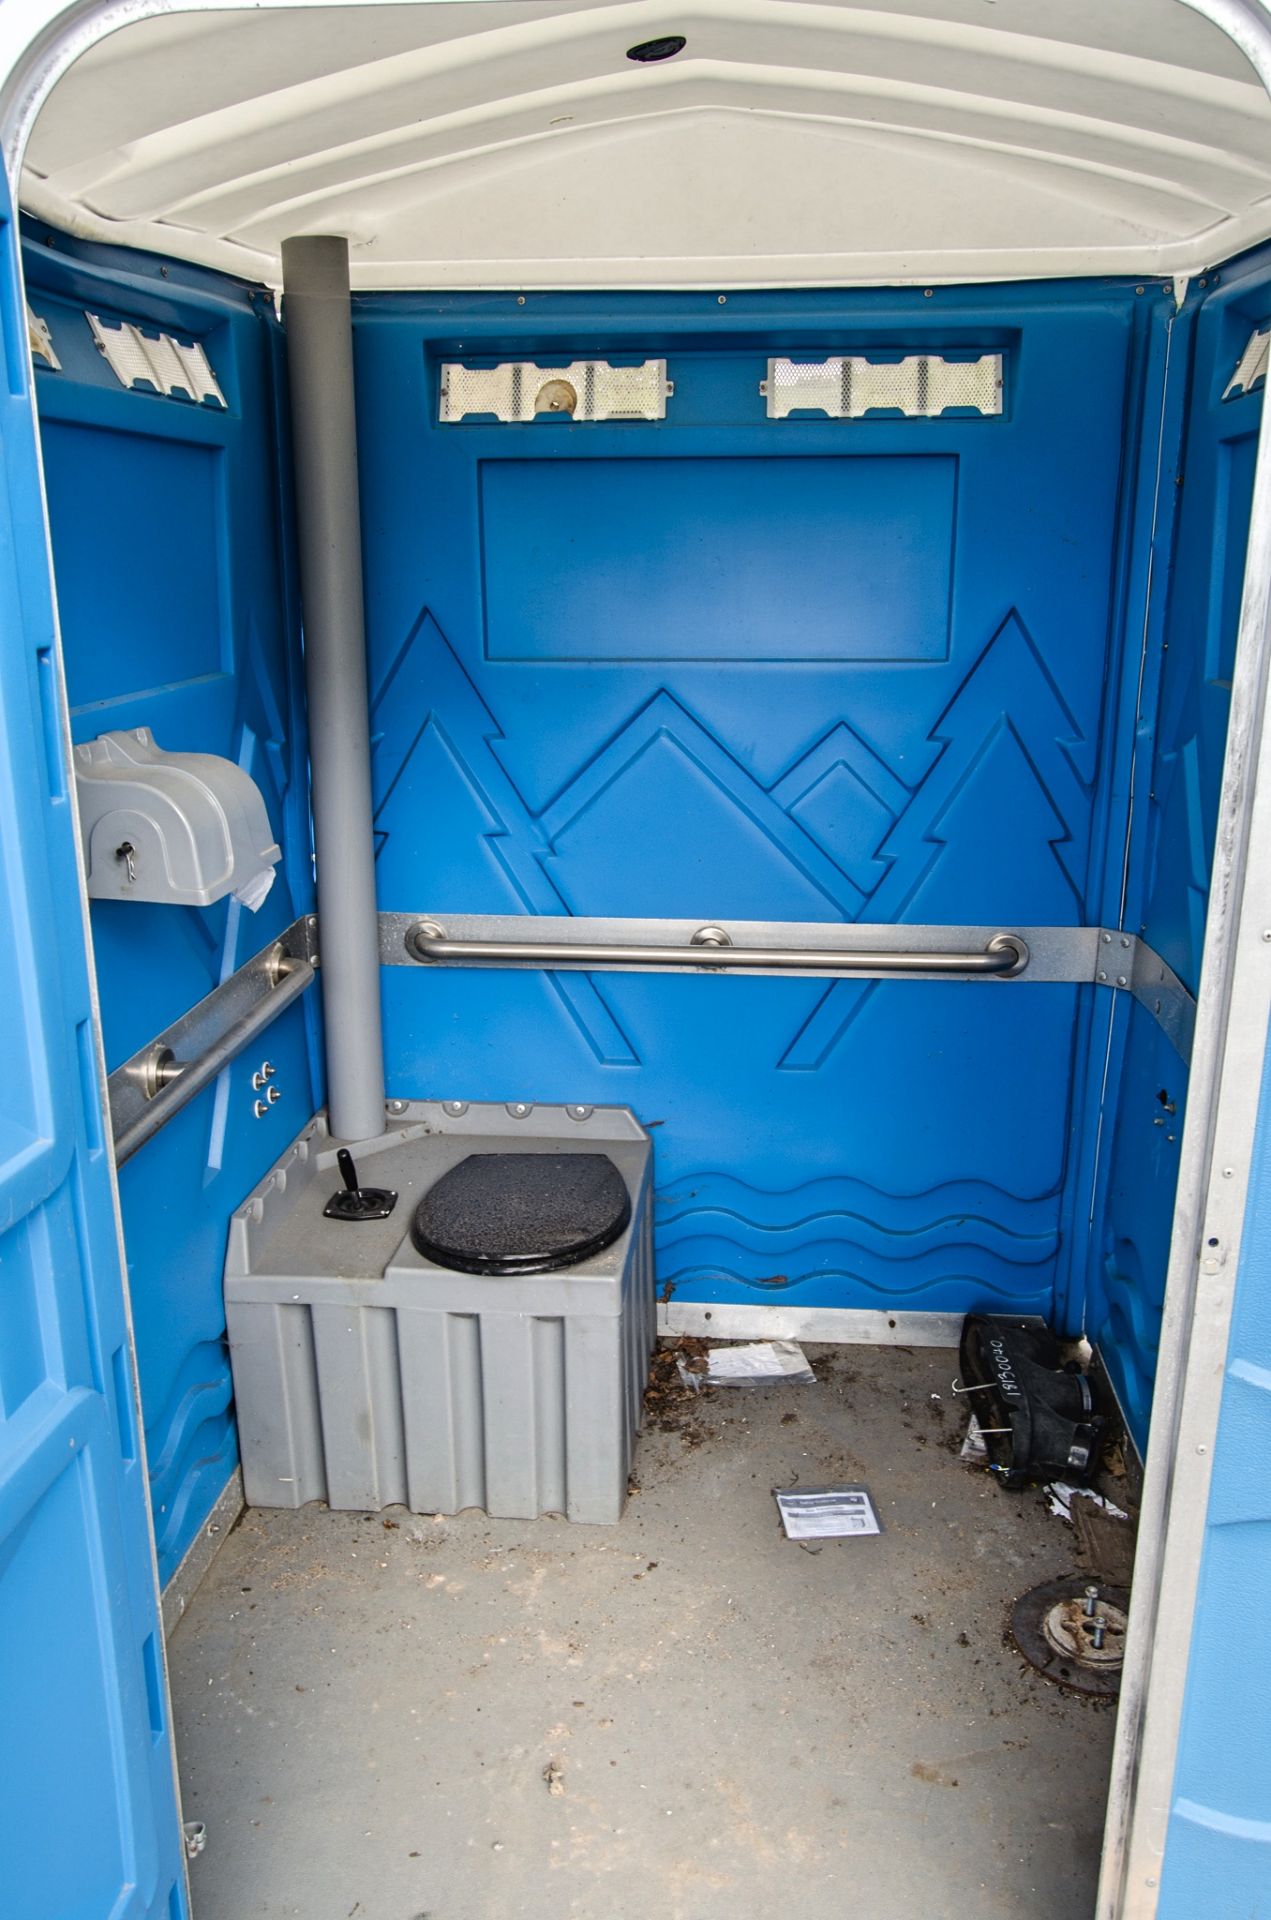 Disabled portable toilet 22087022 - Image 3 of 3